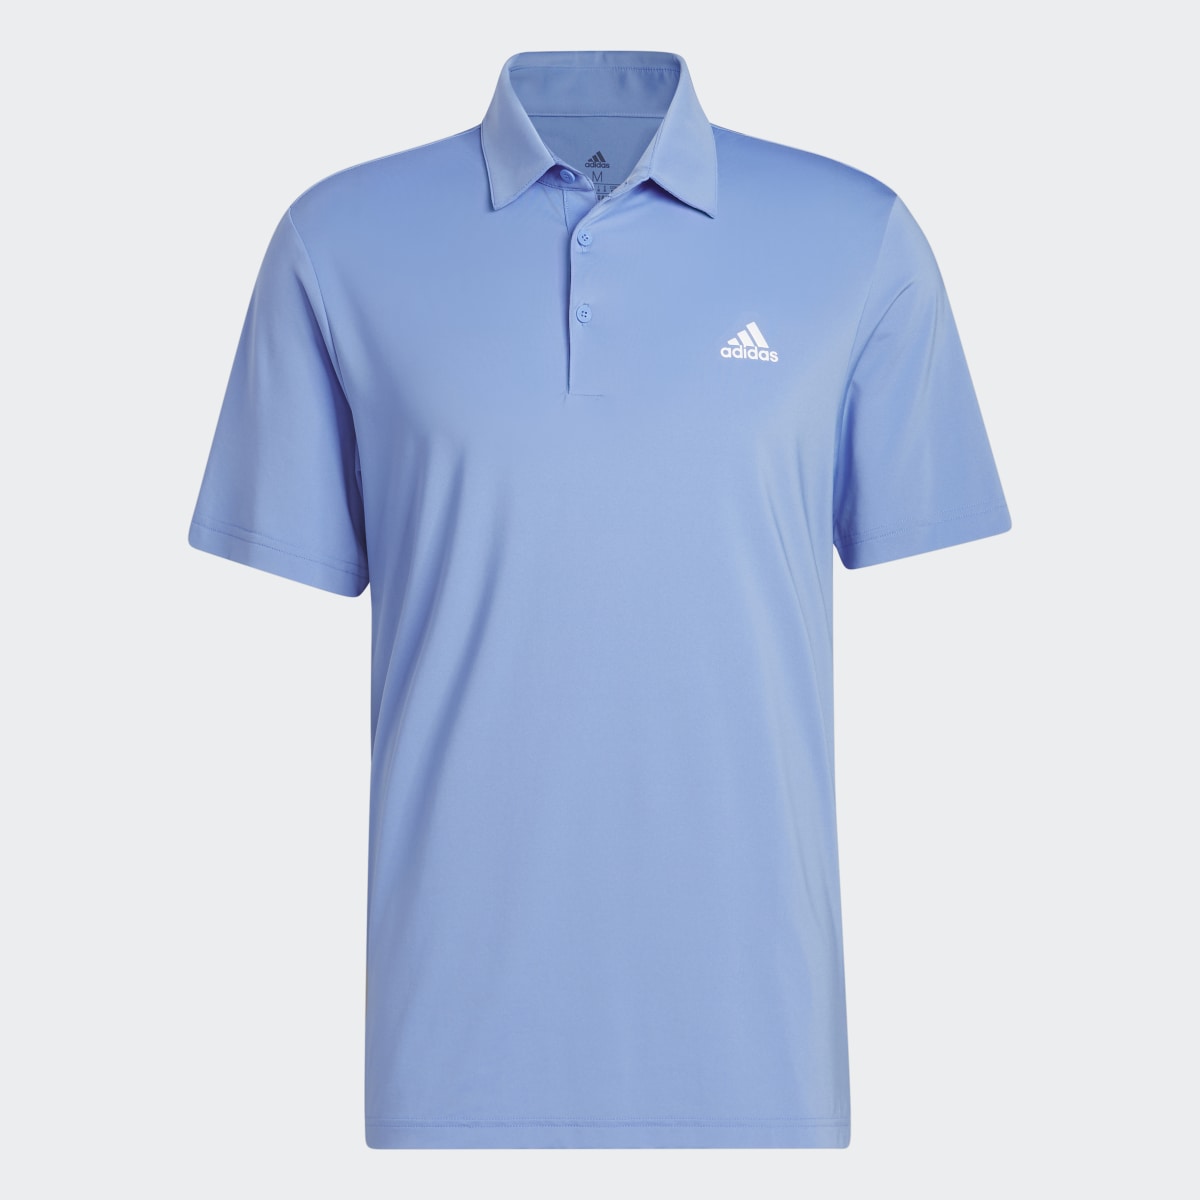 Adidas Ultimate365 Solid Left Chest Polo Shirt. 5